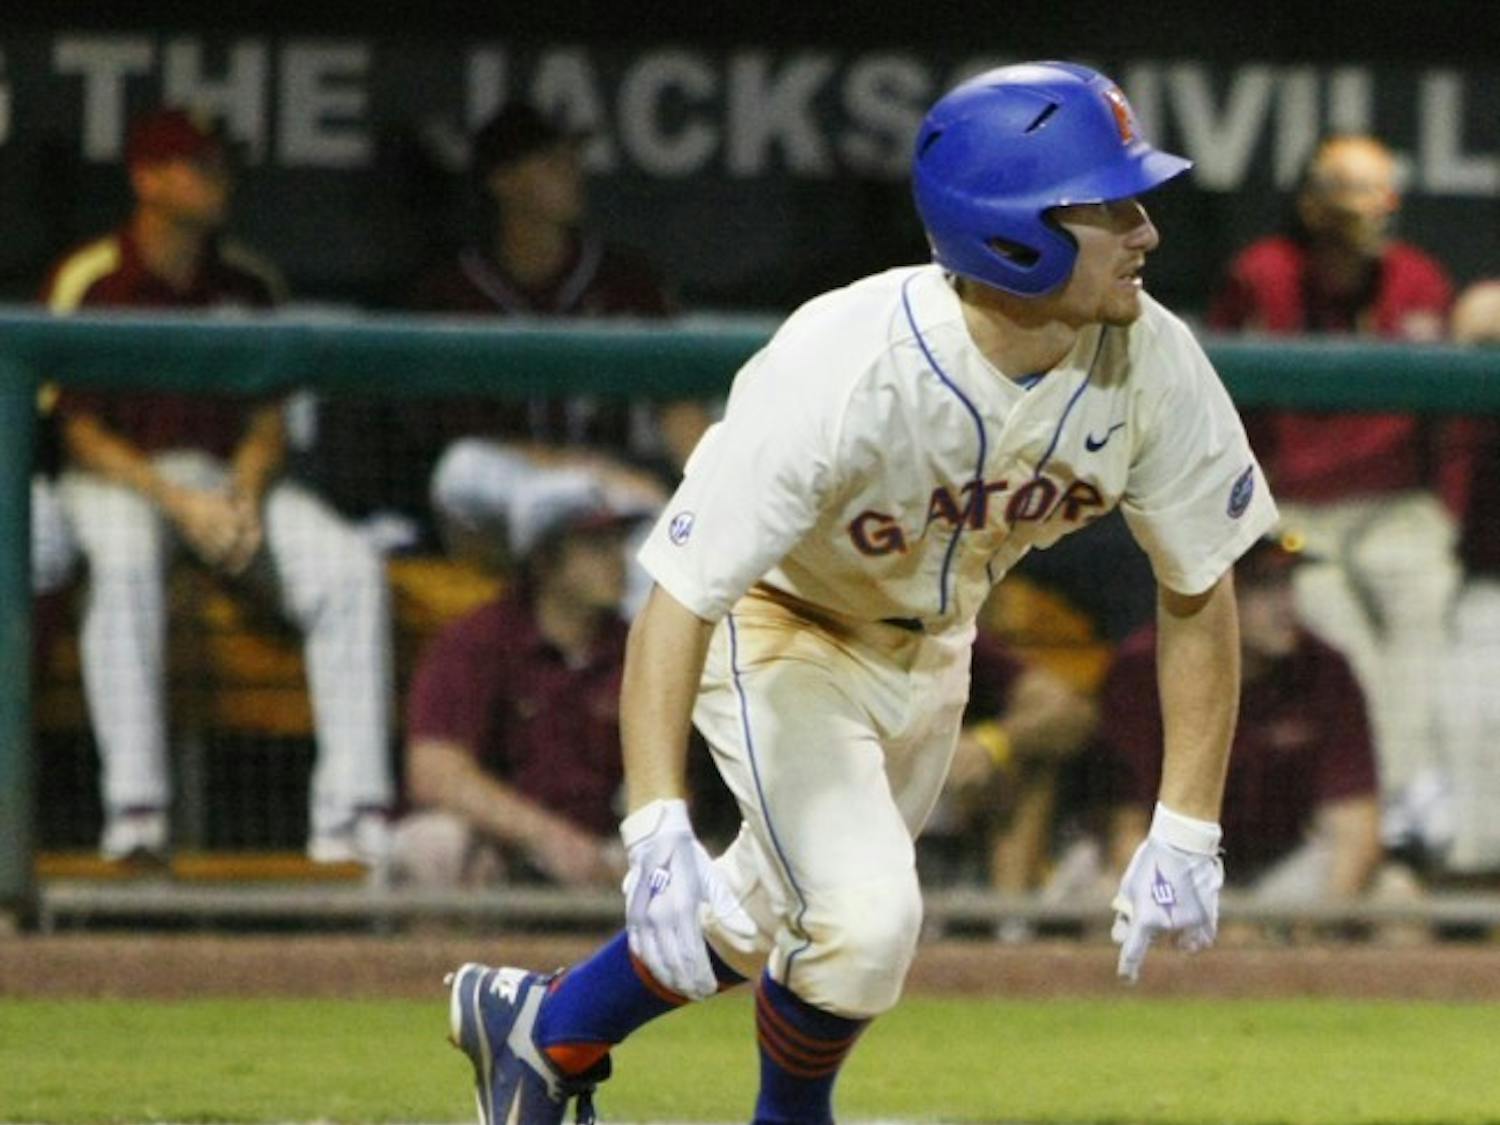 Florida freshman second baseman Casey Turgeon watches as his sixth-inning triple soars toward center fielder James Ramsey. Turgeon’s two RBI on the hit proved to be the winning runs in UF’s 4-1 victory against FSU.